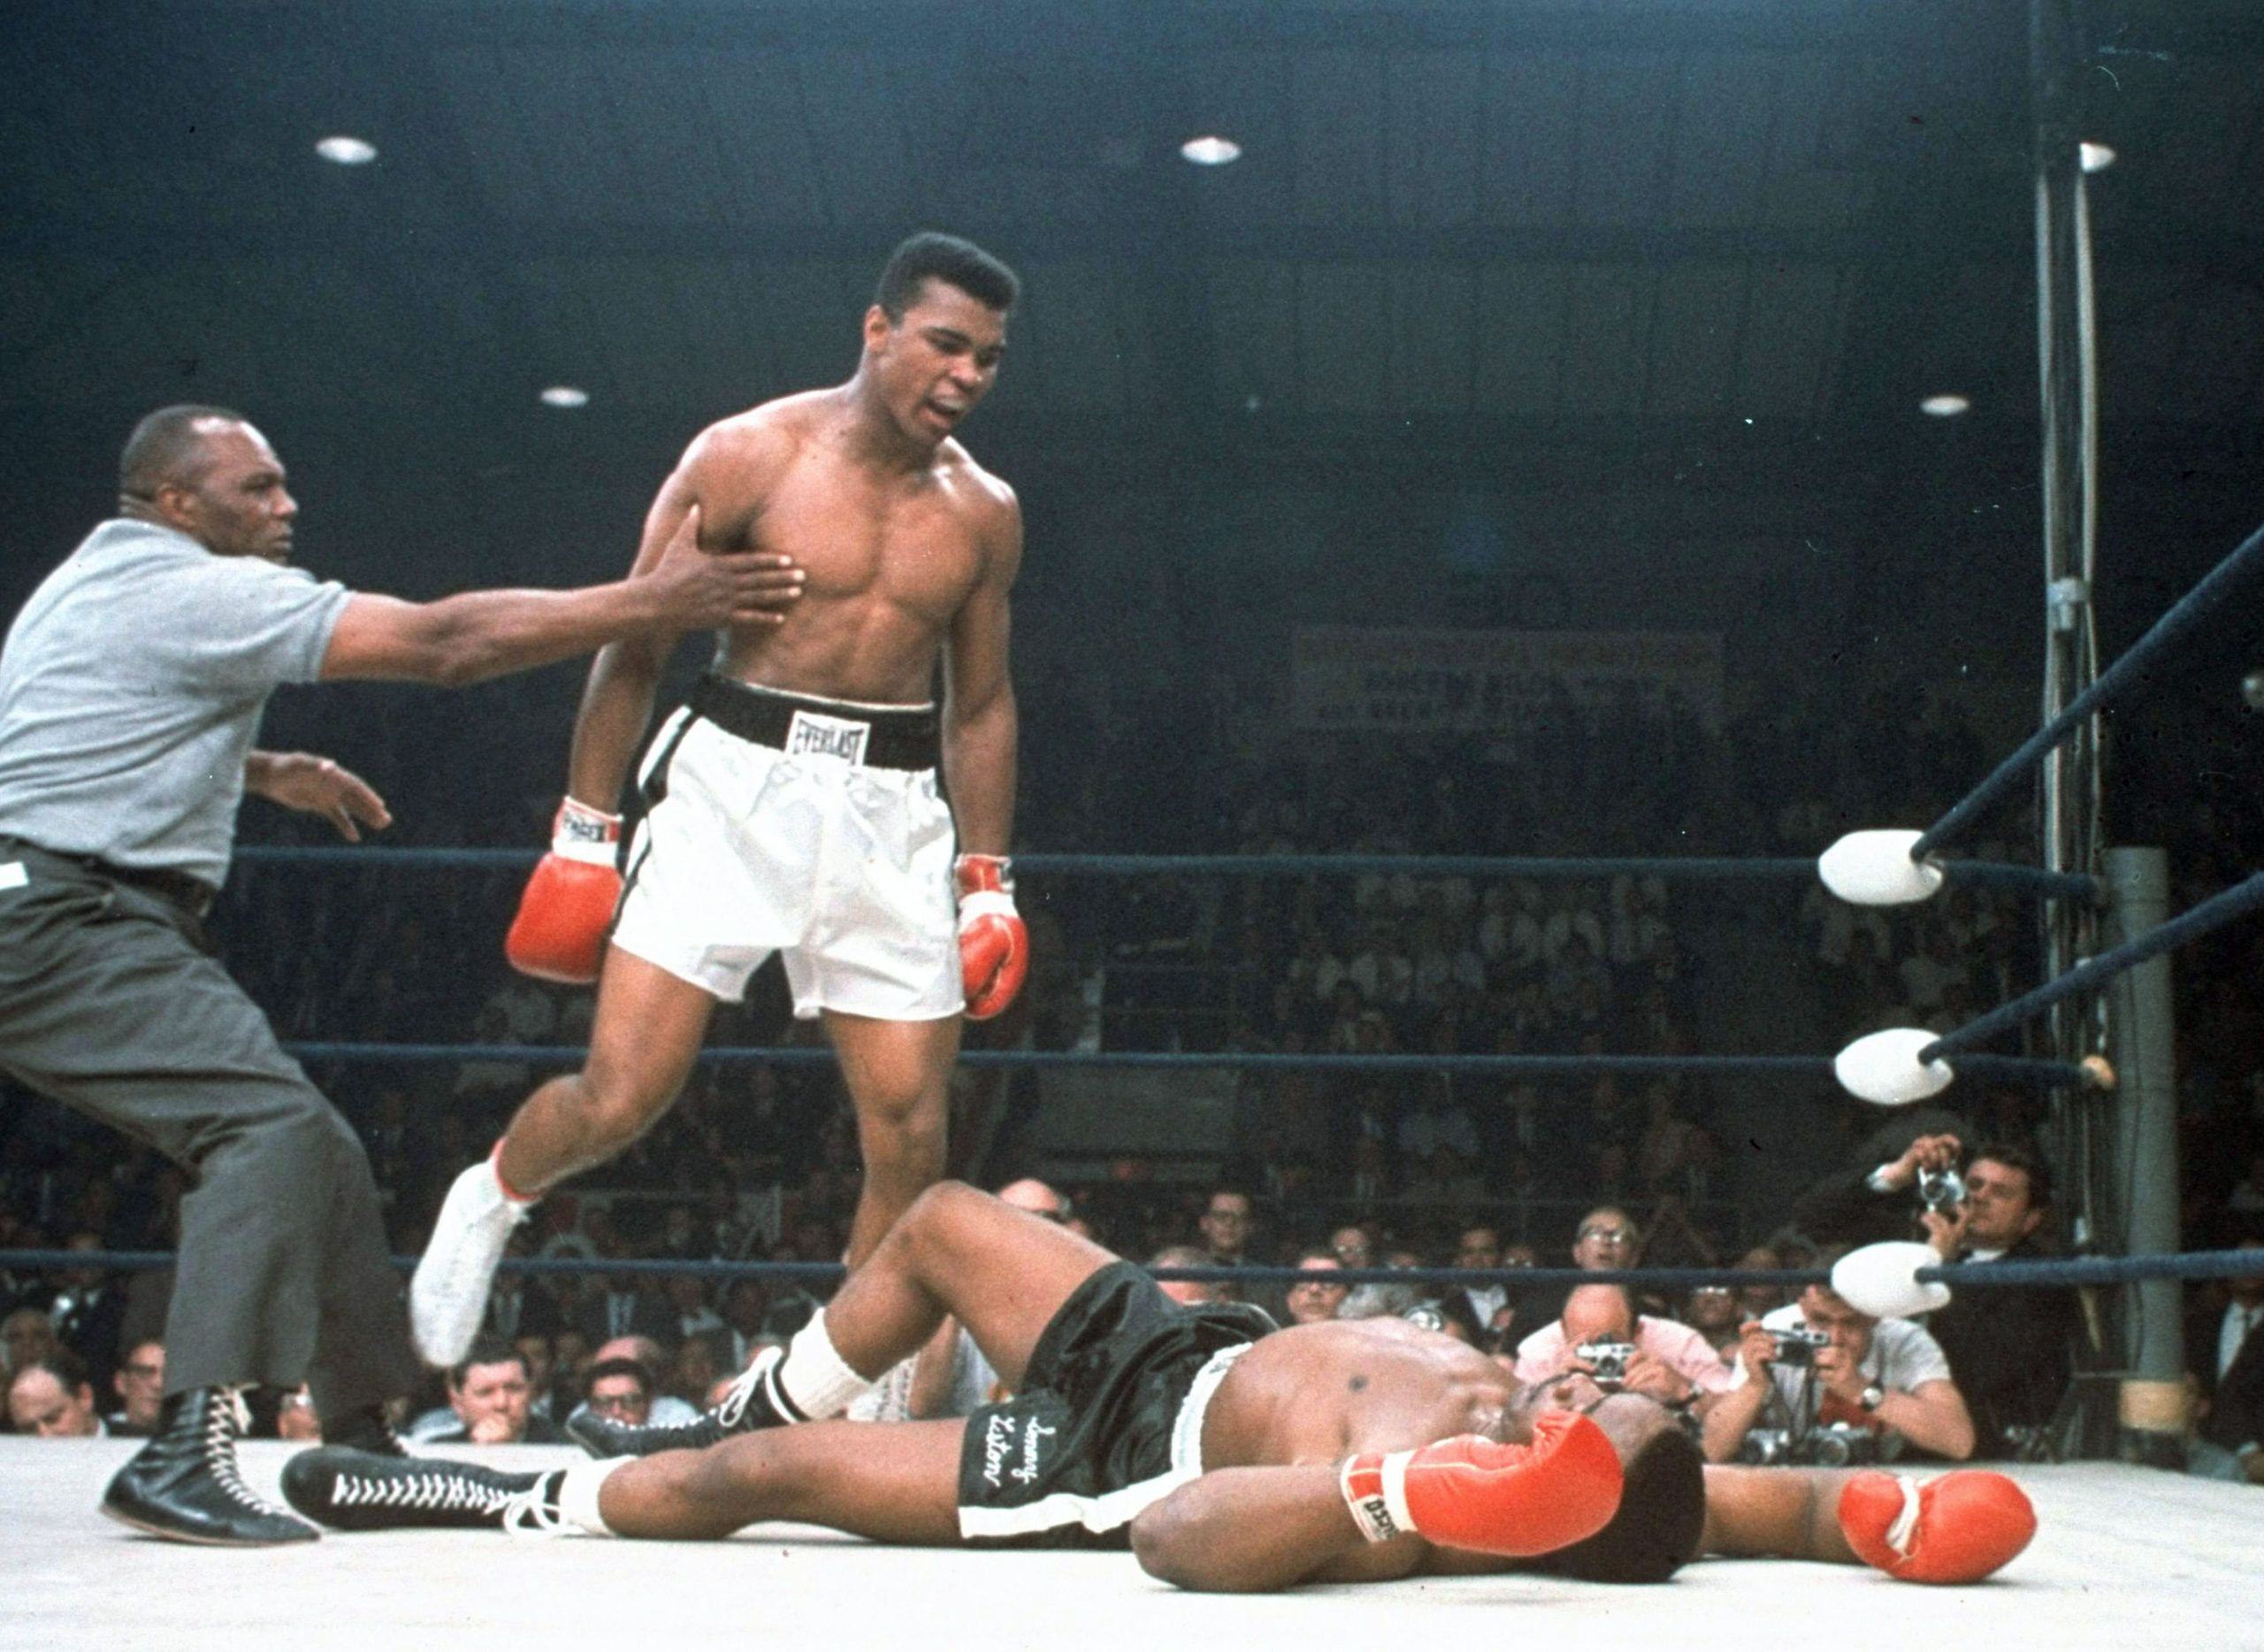 Muhammad Ali is held back by referee Joe Walcott, left, after Ali knocked out Sonny Liston in the first round of their 1965 title fight in Lewiston, Maine.